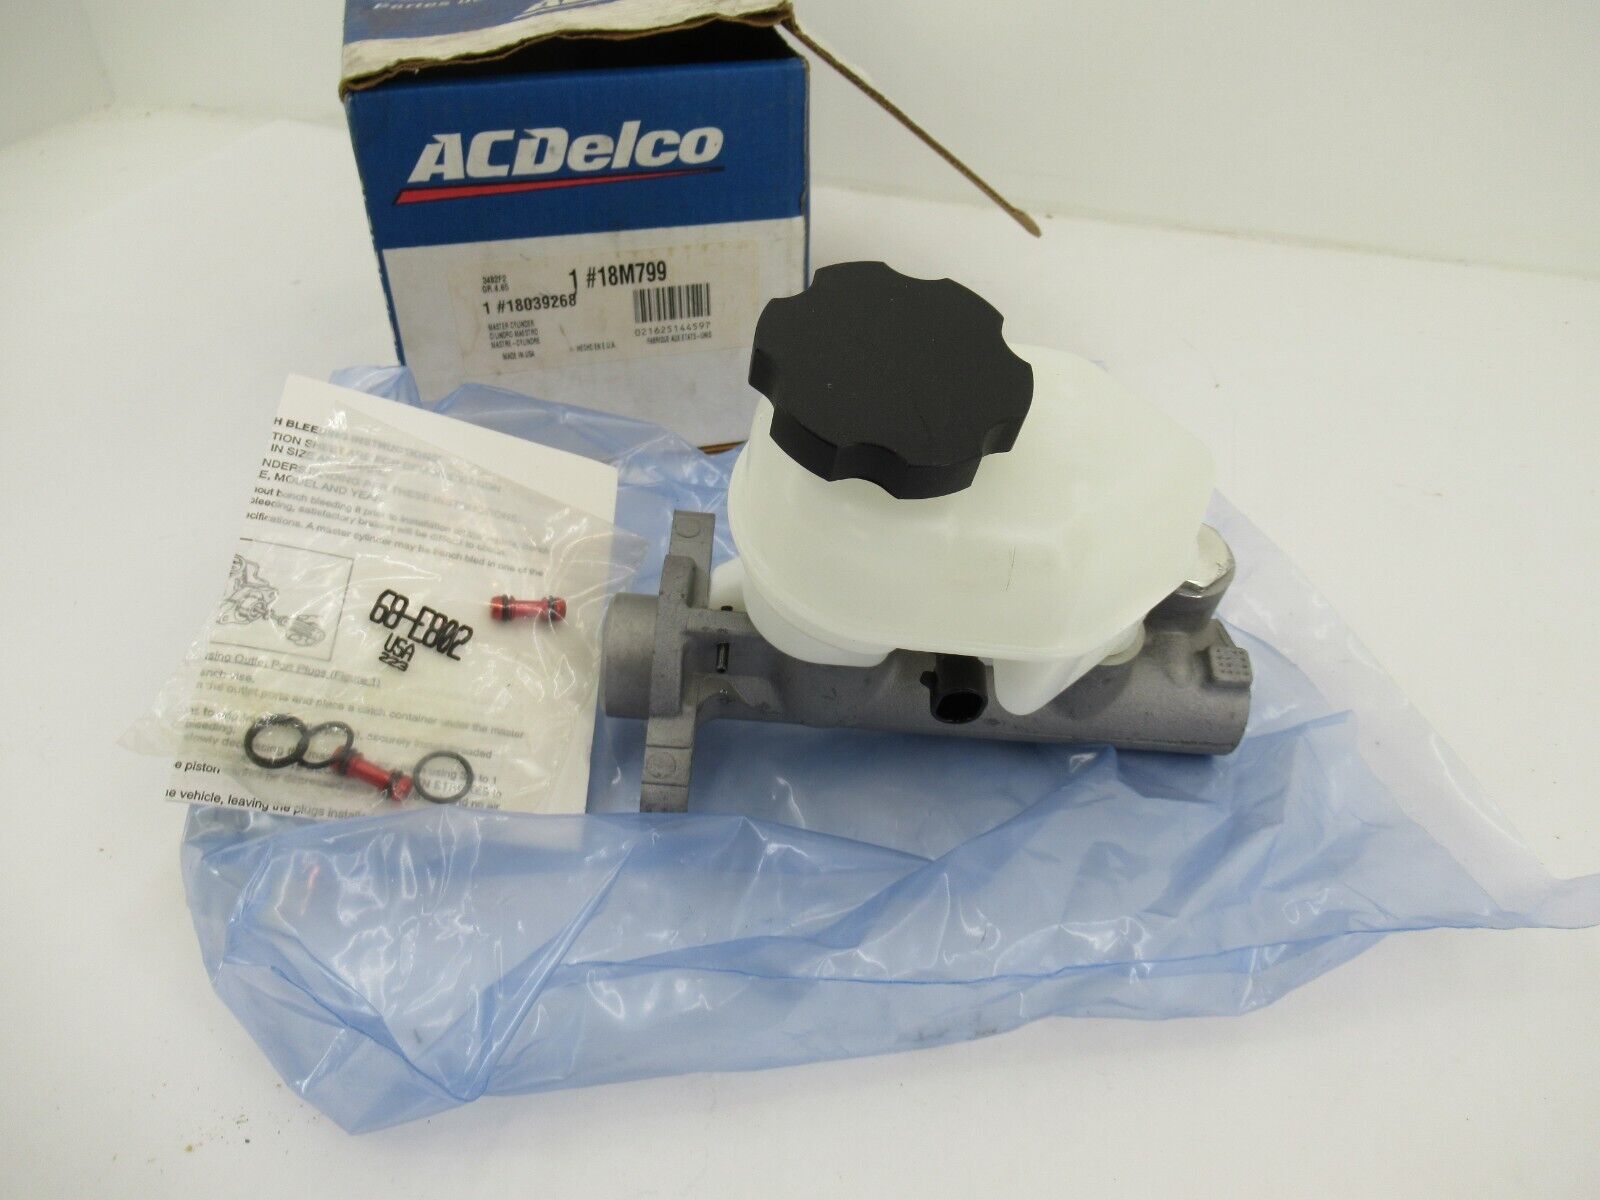 ACDELCO BRAKE MASTER CYLINDER COMPLETE NEW GENUINE GM PART MADE IN USA NOS OEM